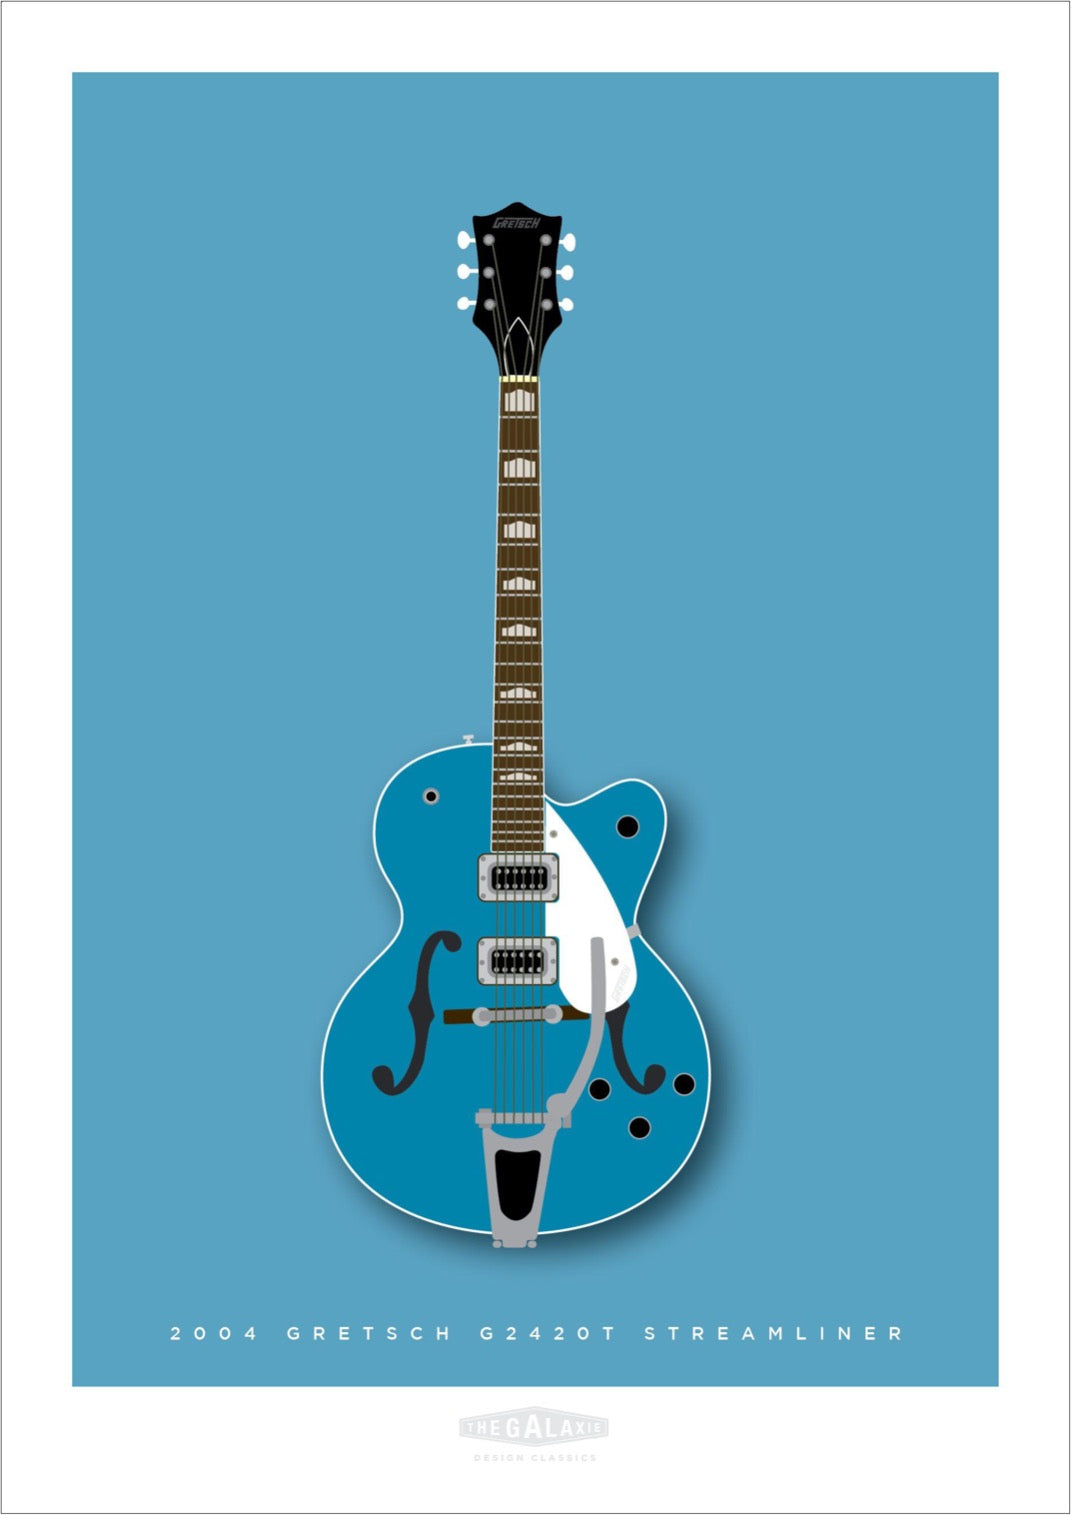 Hand drawn print of a classic blue 1957 Gretsch G2420T Streamliner guitar on a blue background.